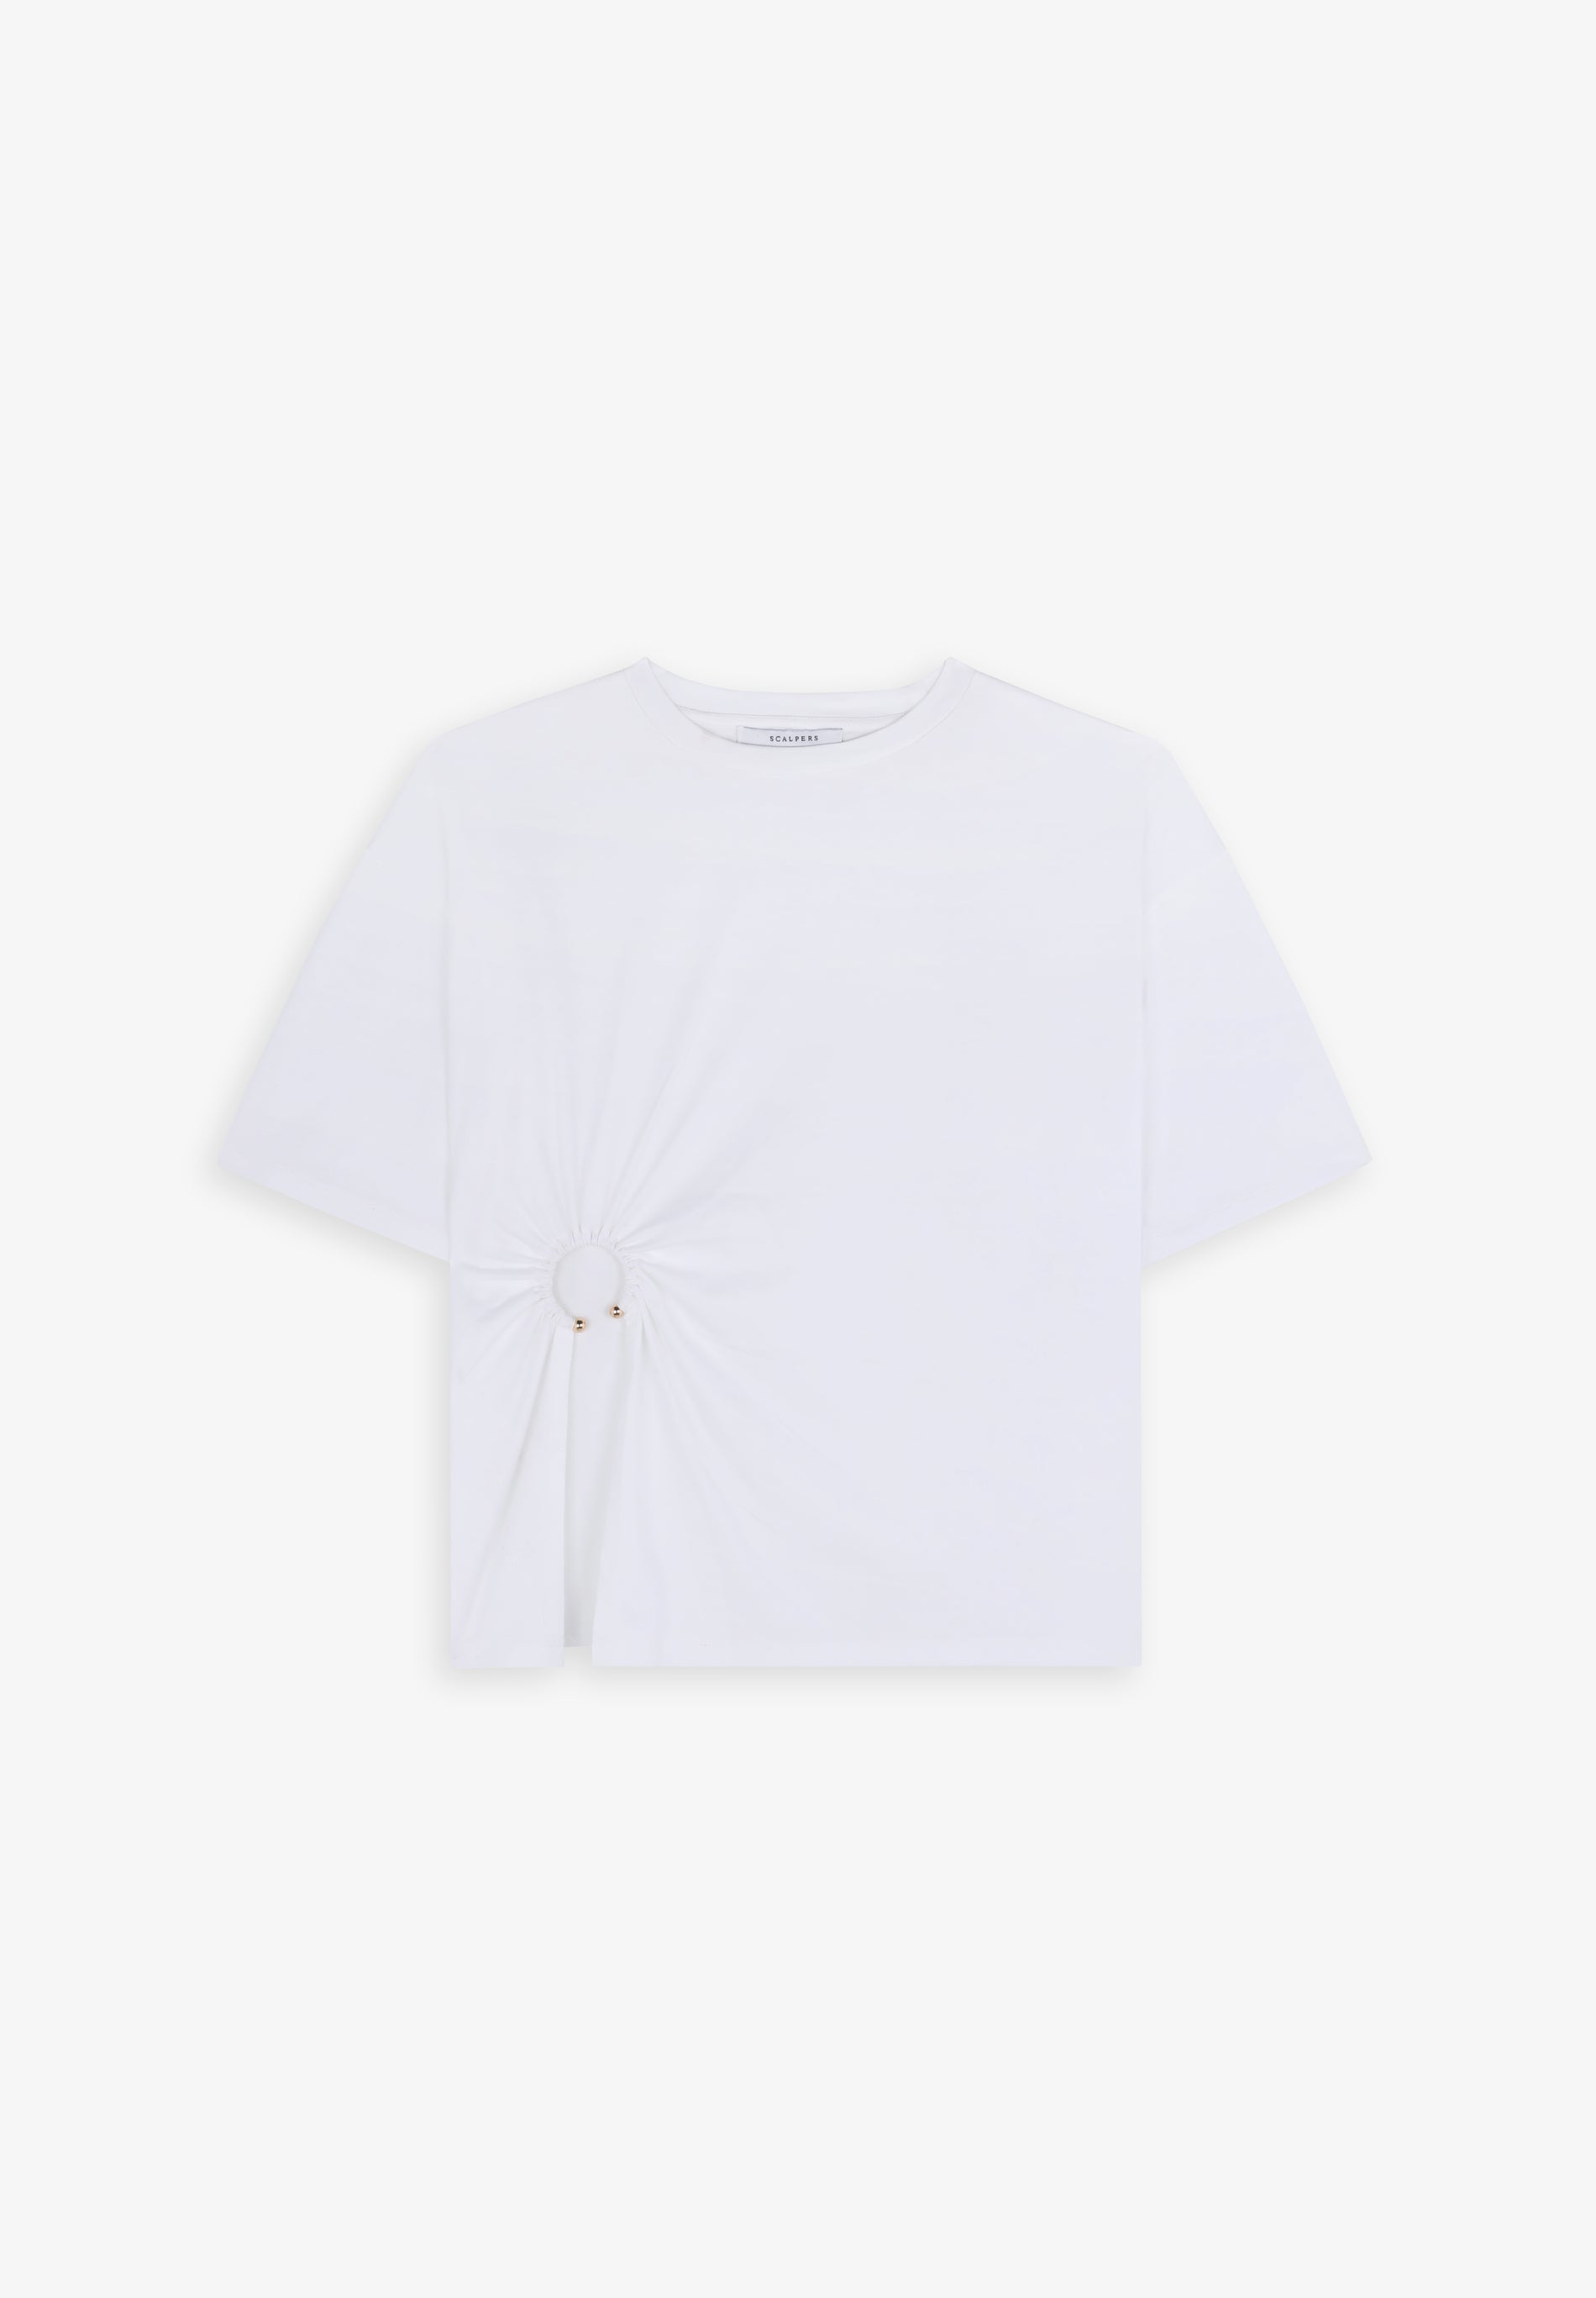 FRONT EYELET TEE